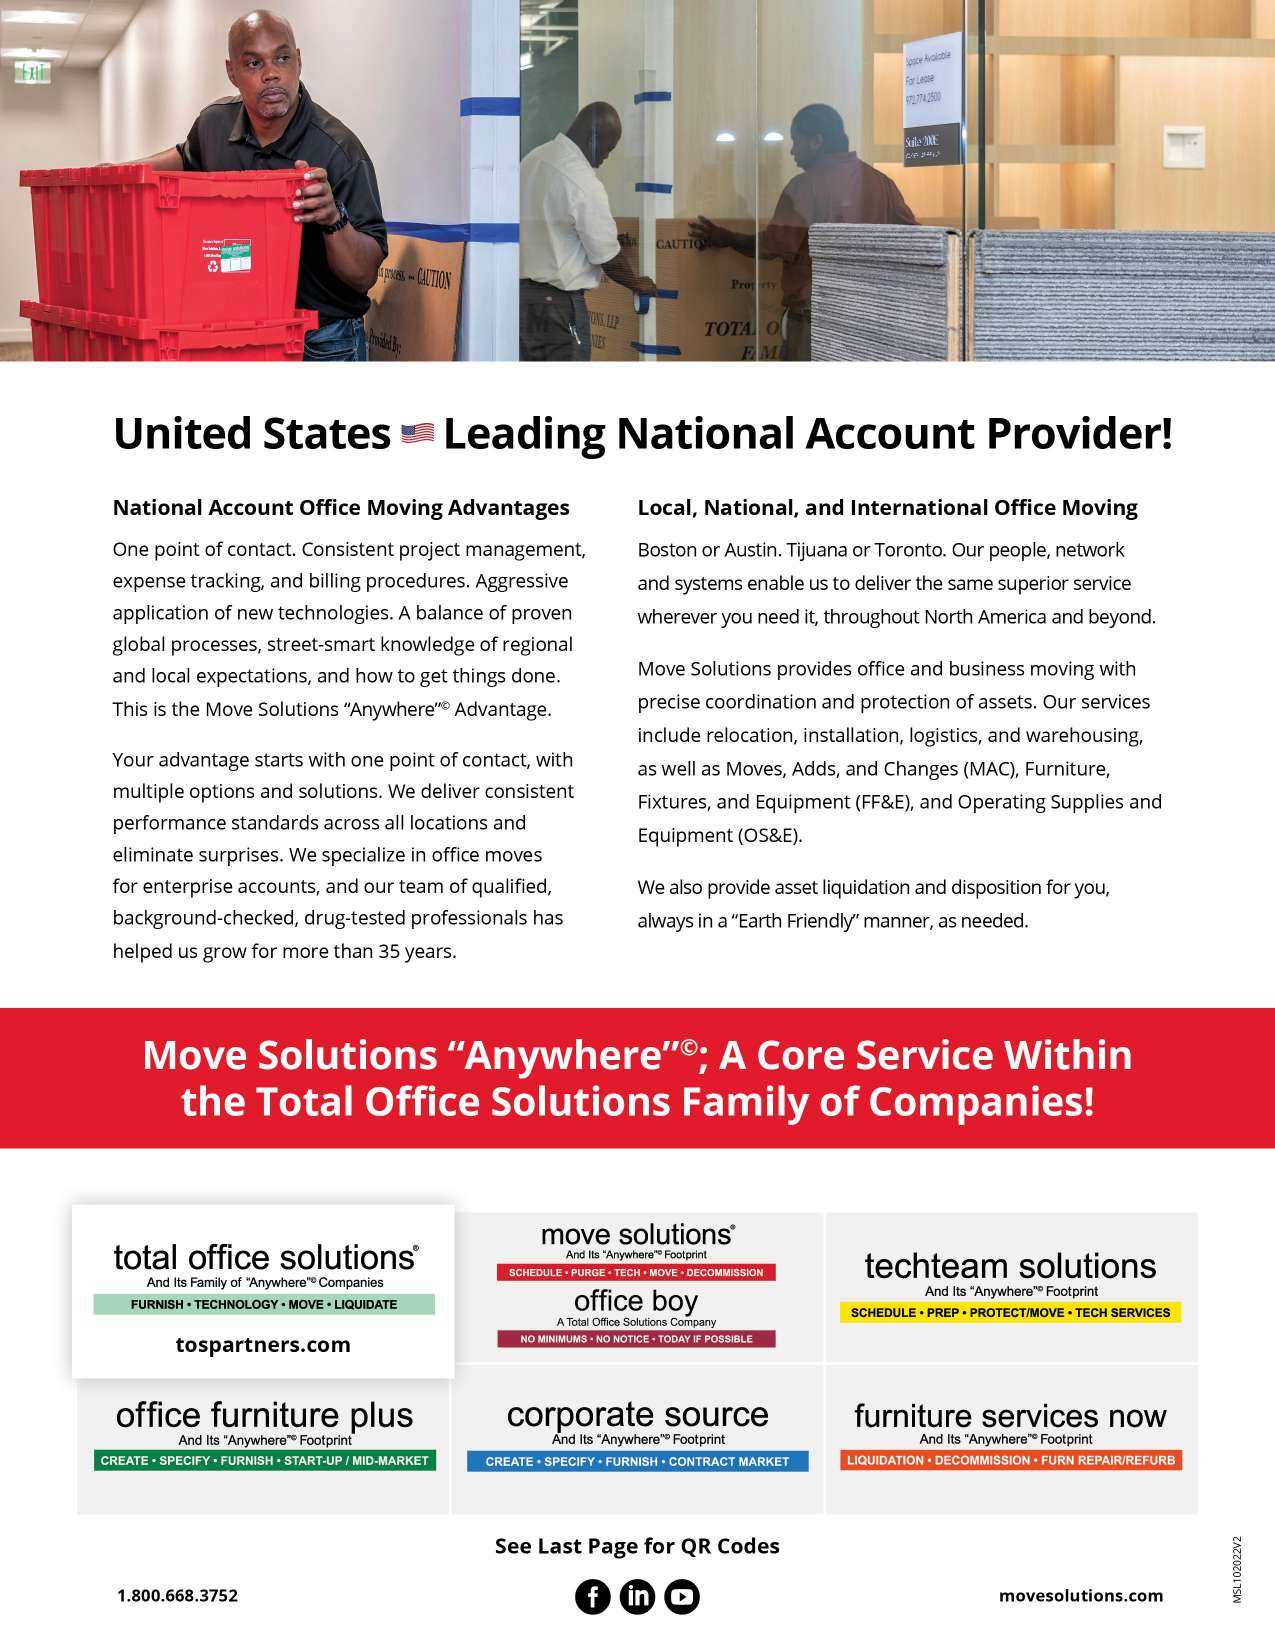 Brochure-Move-Solutions-Anywhere-Single-Pages-MSL